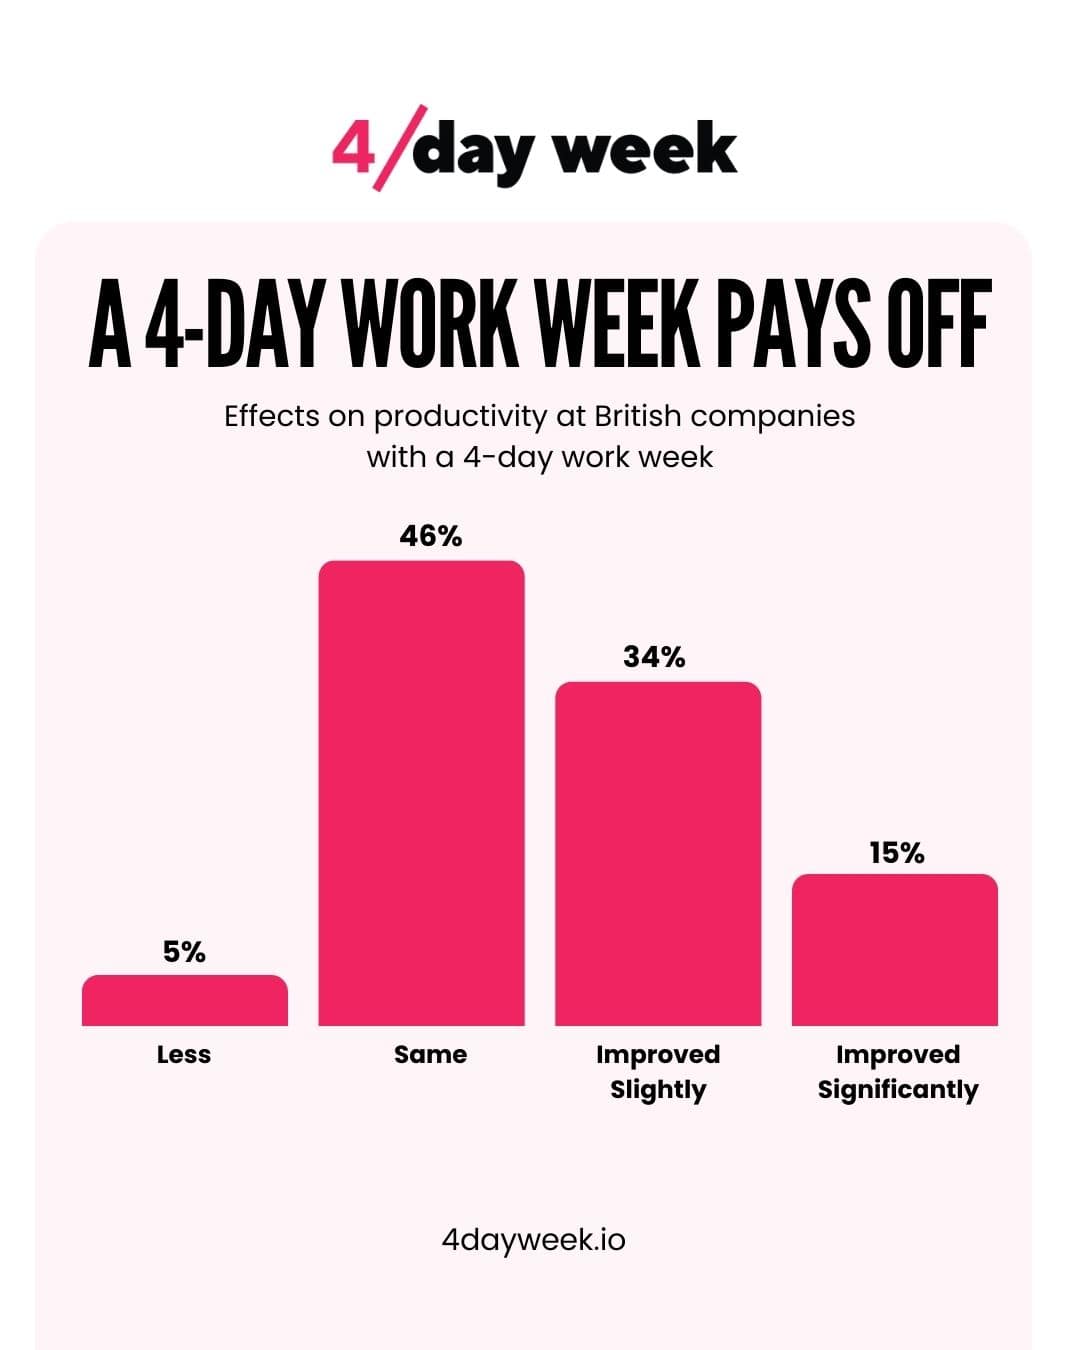 A 4-Day Work Week Pays Off: Boosting Productivity
